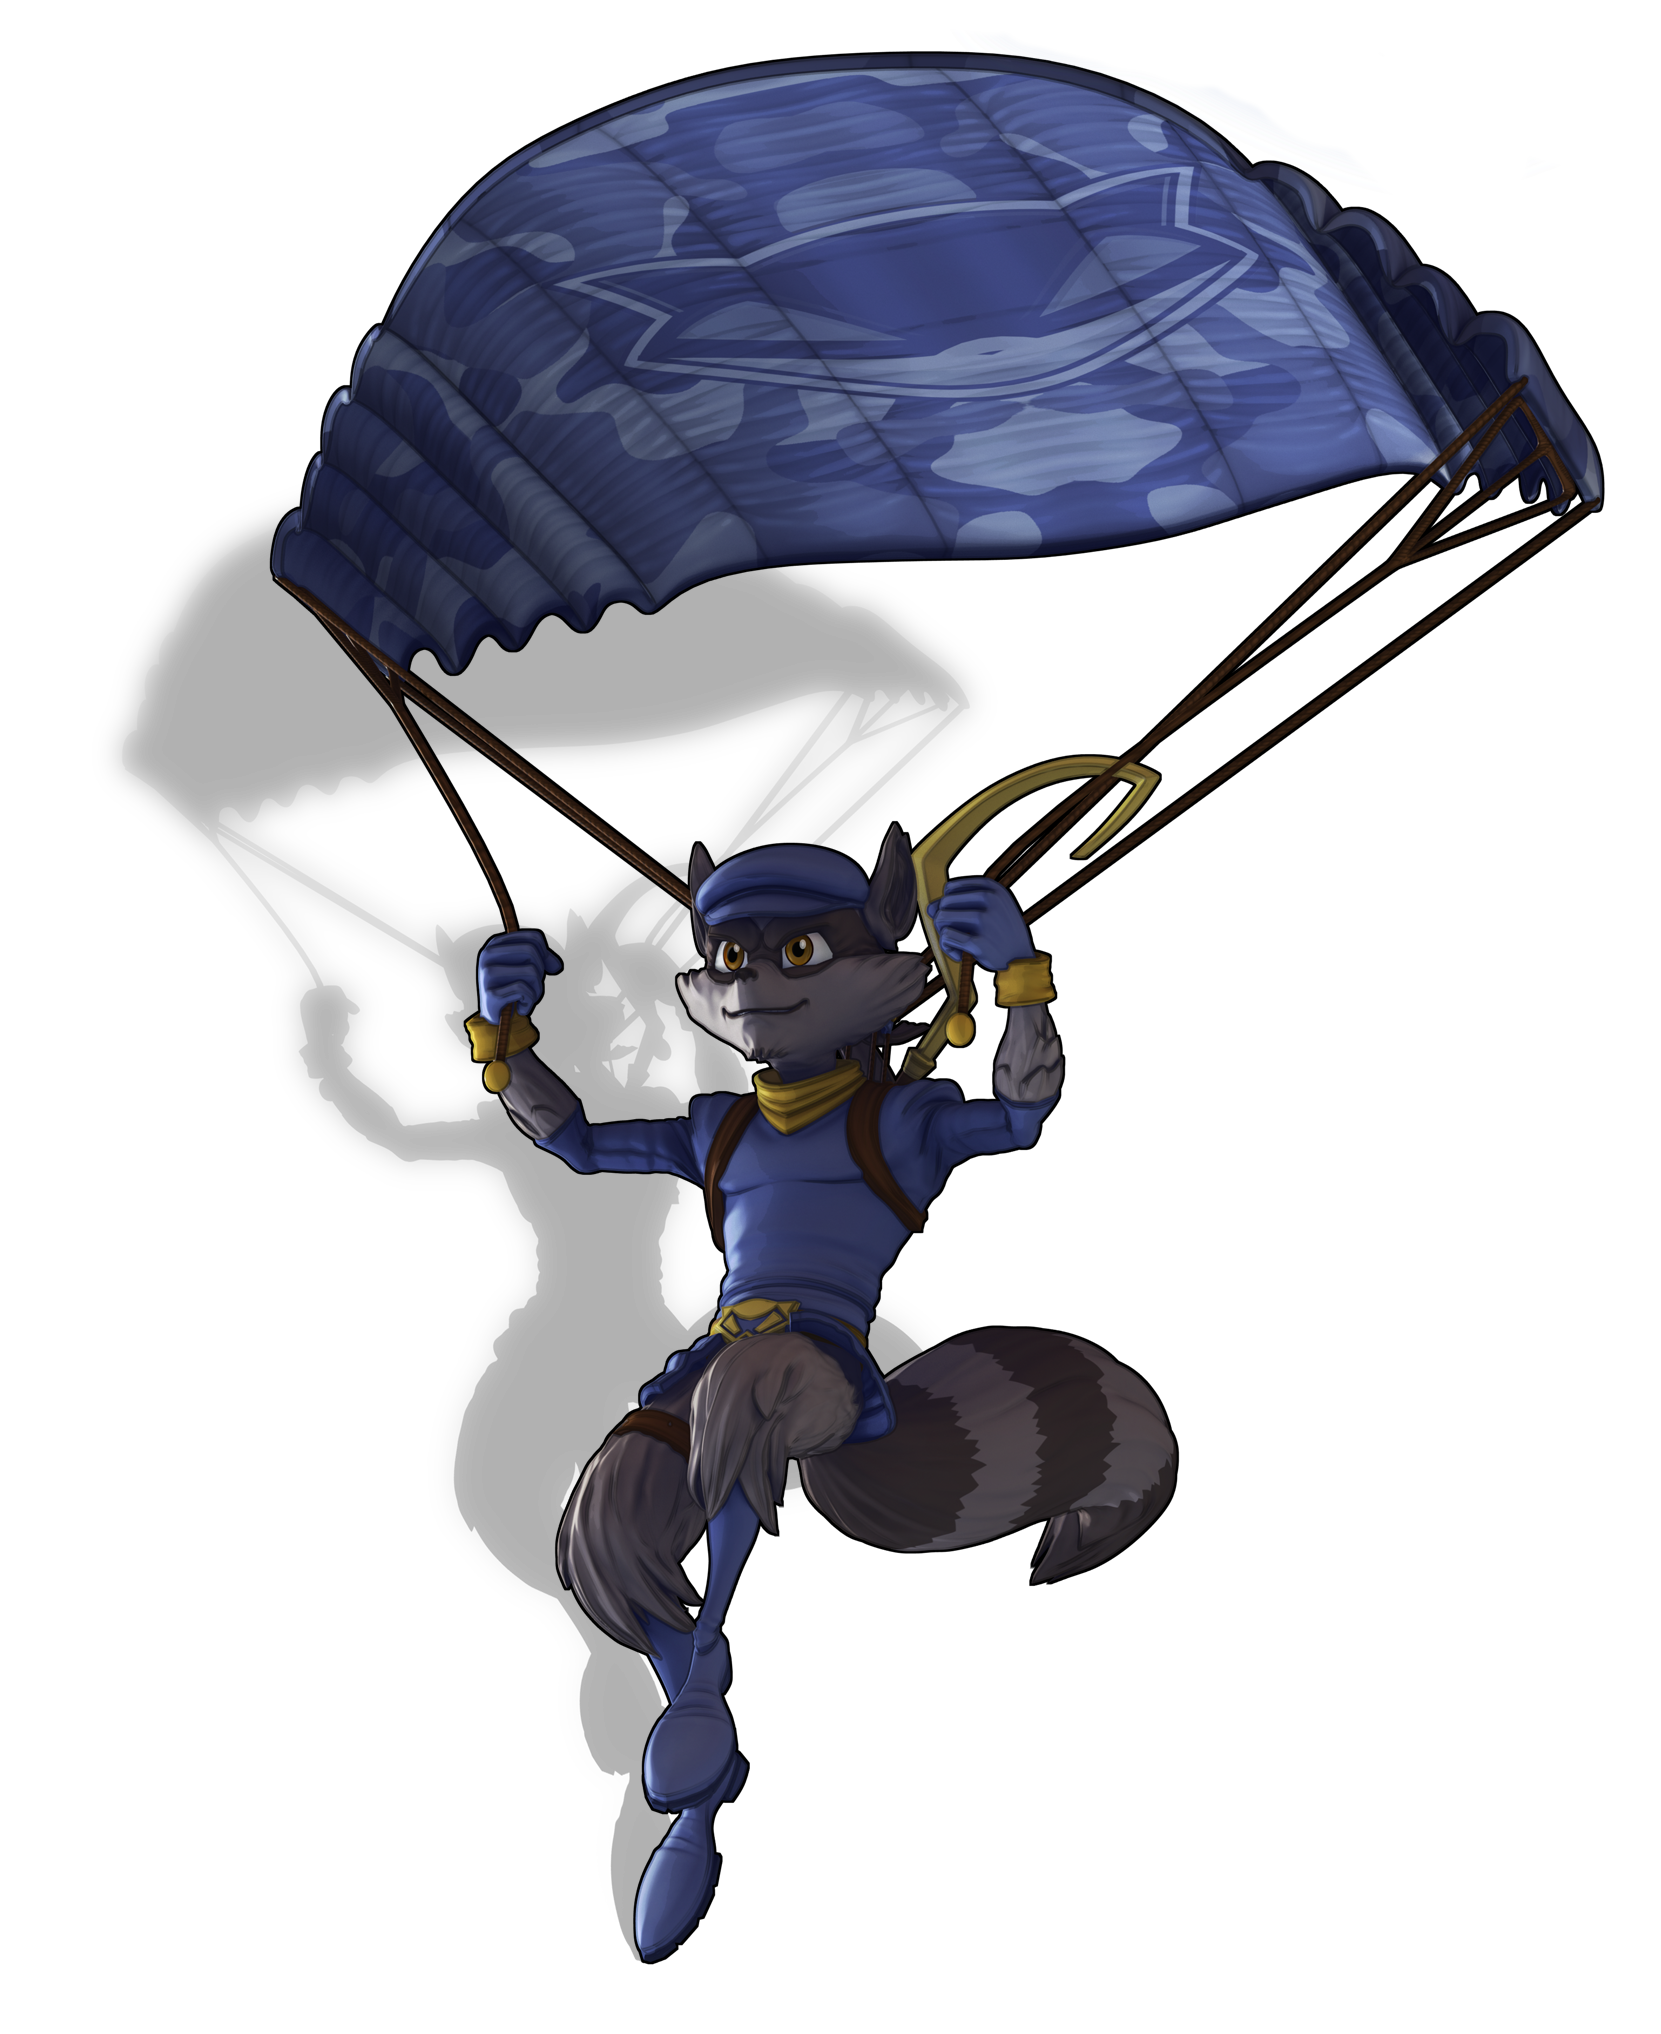 Paraglider | Sly Cooper Wiki | FANDOM powered by Wikia